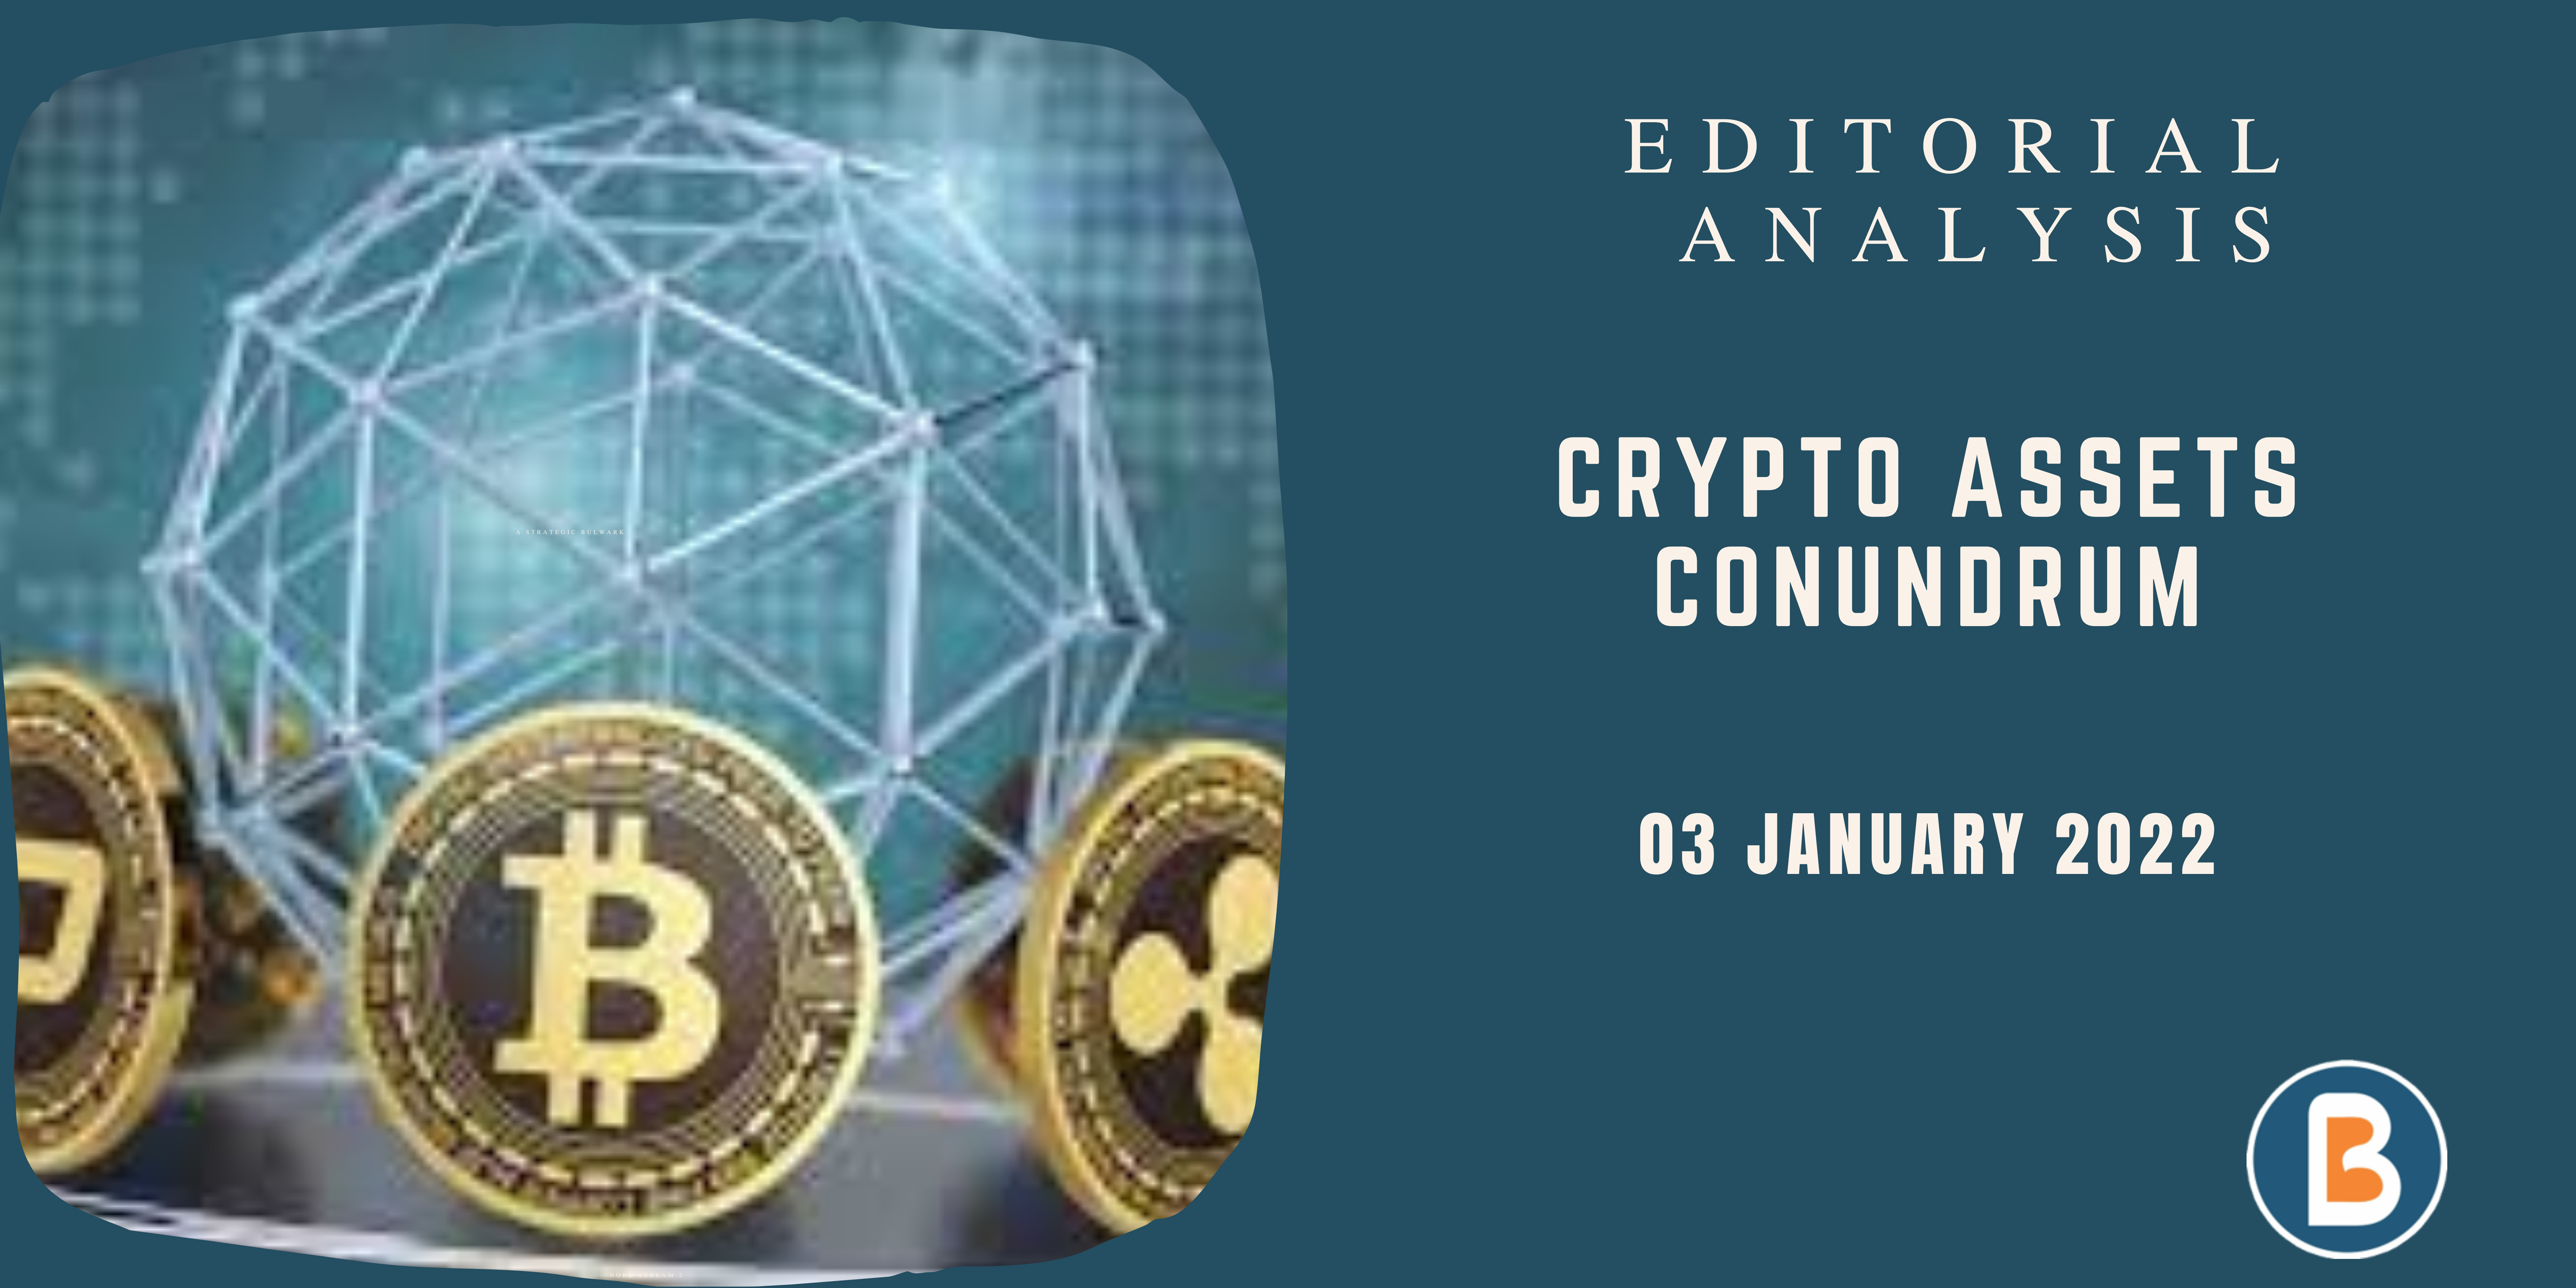 Editorial Analysis for UPSC - Crypto Assets Conundrum